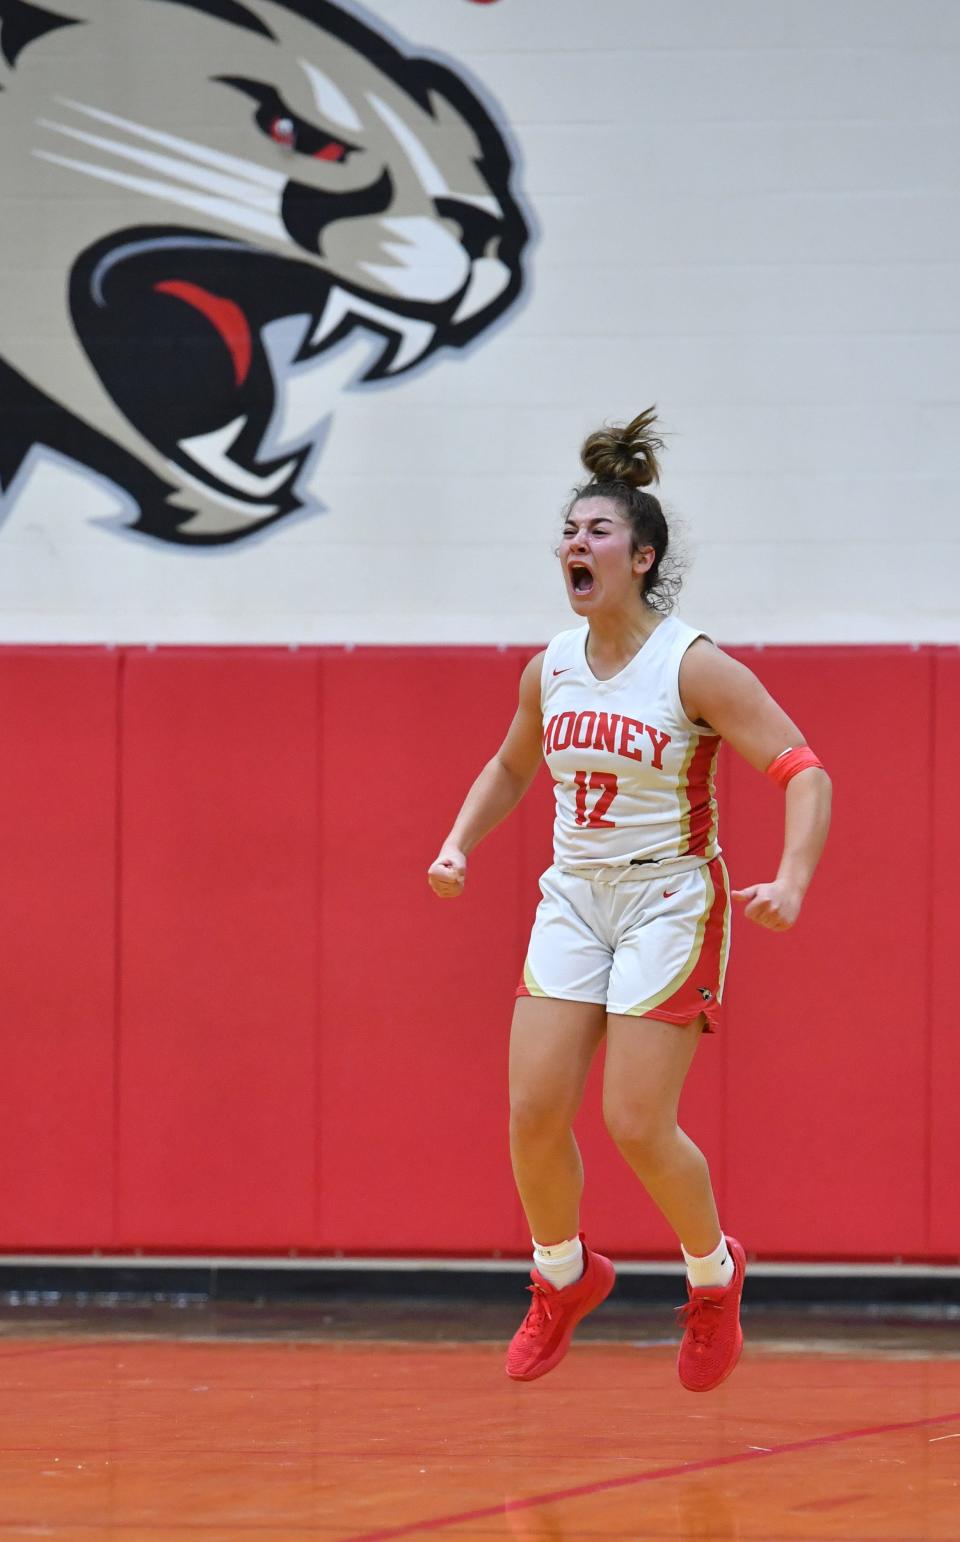 Cardinal Mooney's Olivia Davis shows her emotions after making a three-point shot late in the game. Cardinal Mooney hosted Tampa Catholic in the girls basketball regional semi-final on Tuesday night. 